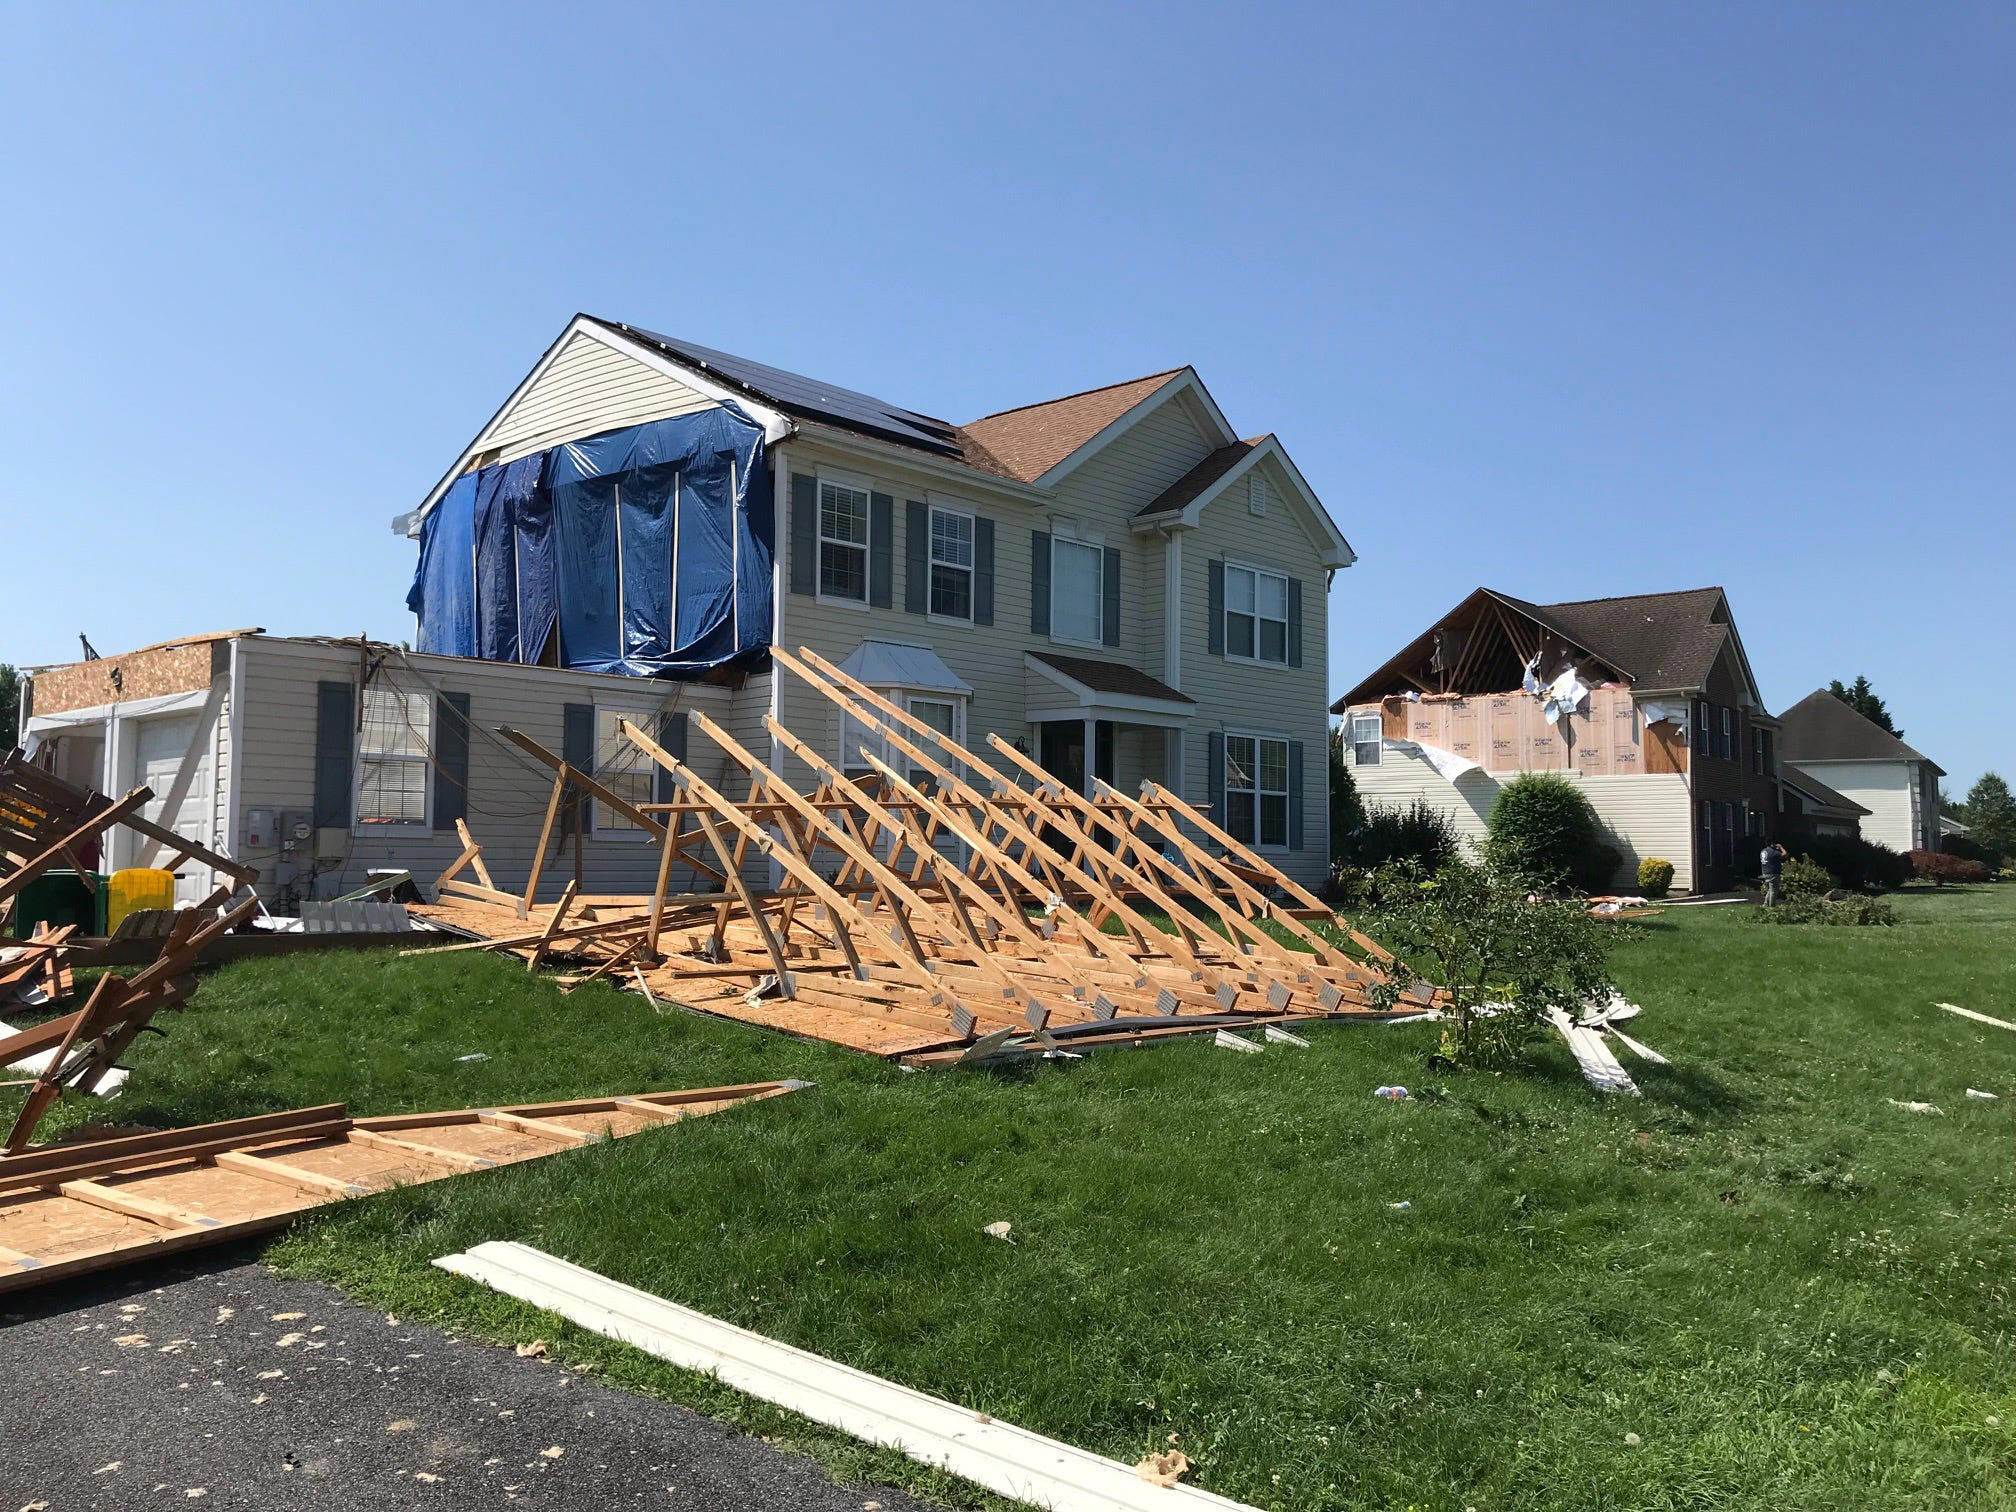 Tornado touched down near Middletown during Sunday's storms, National ...